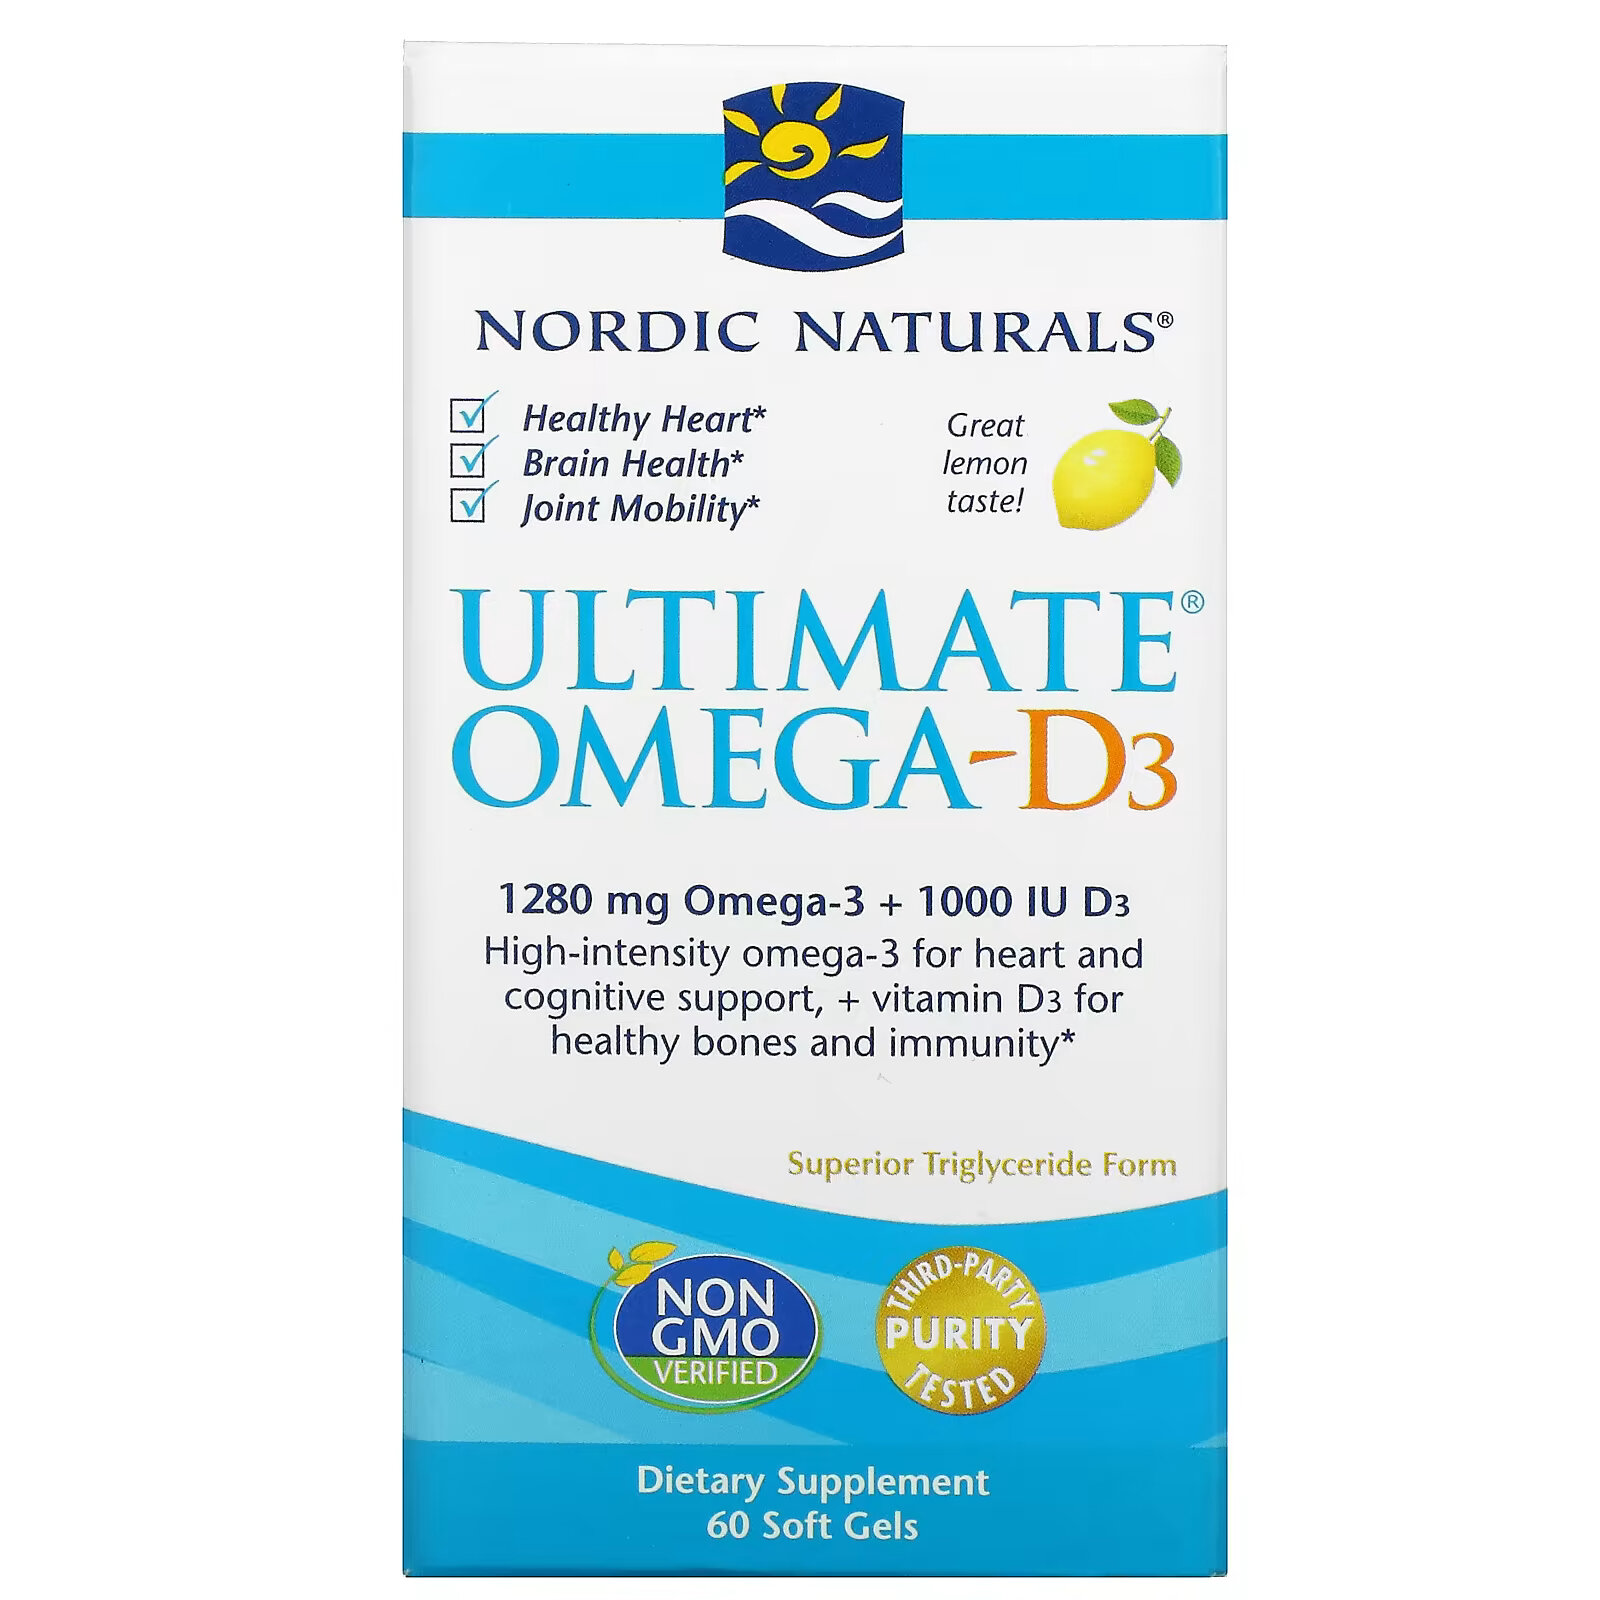 Nordic Naturals, Омега-D3 Ultimate, лимон, 1000 мг, 60 гелевых капсул nordic naturals эпк экстра лимон 1000 мг 60 гелевых капсул